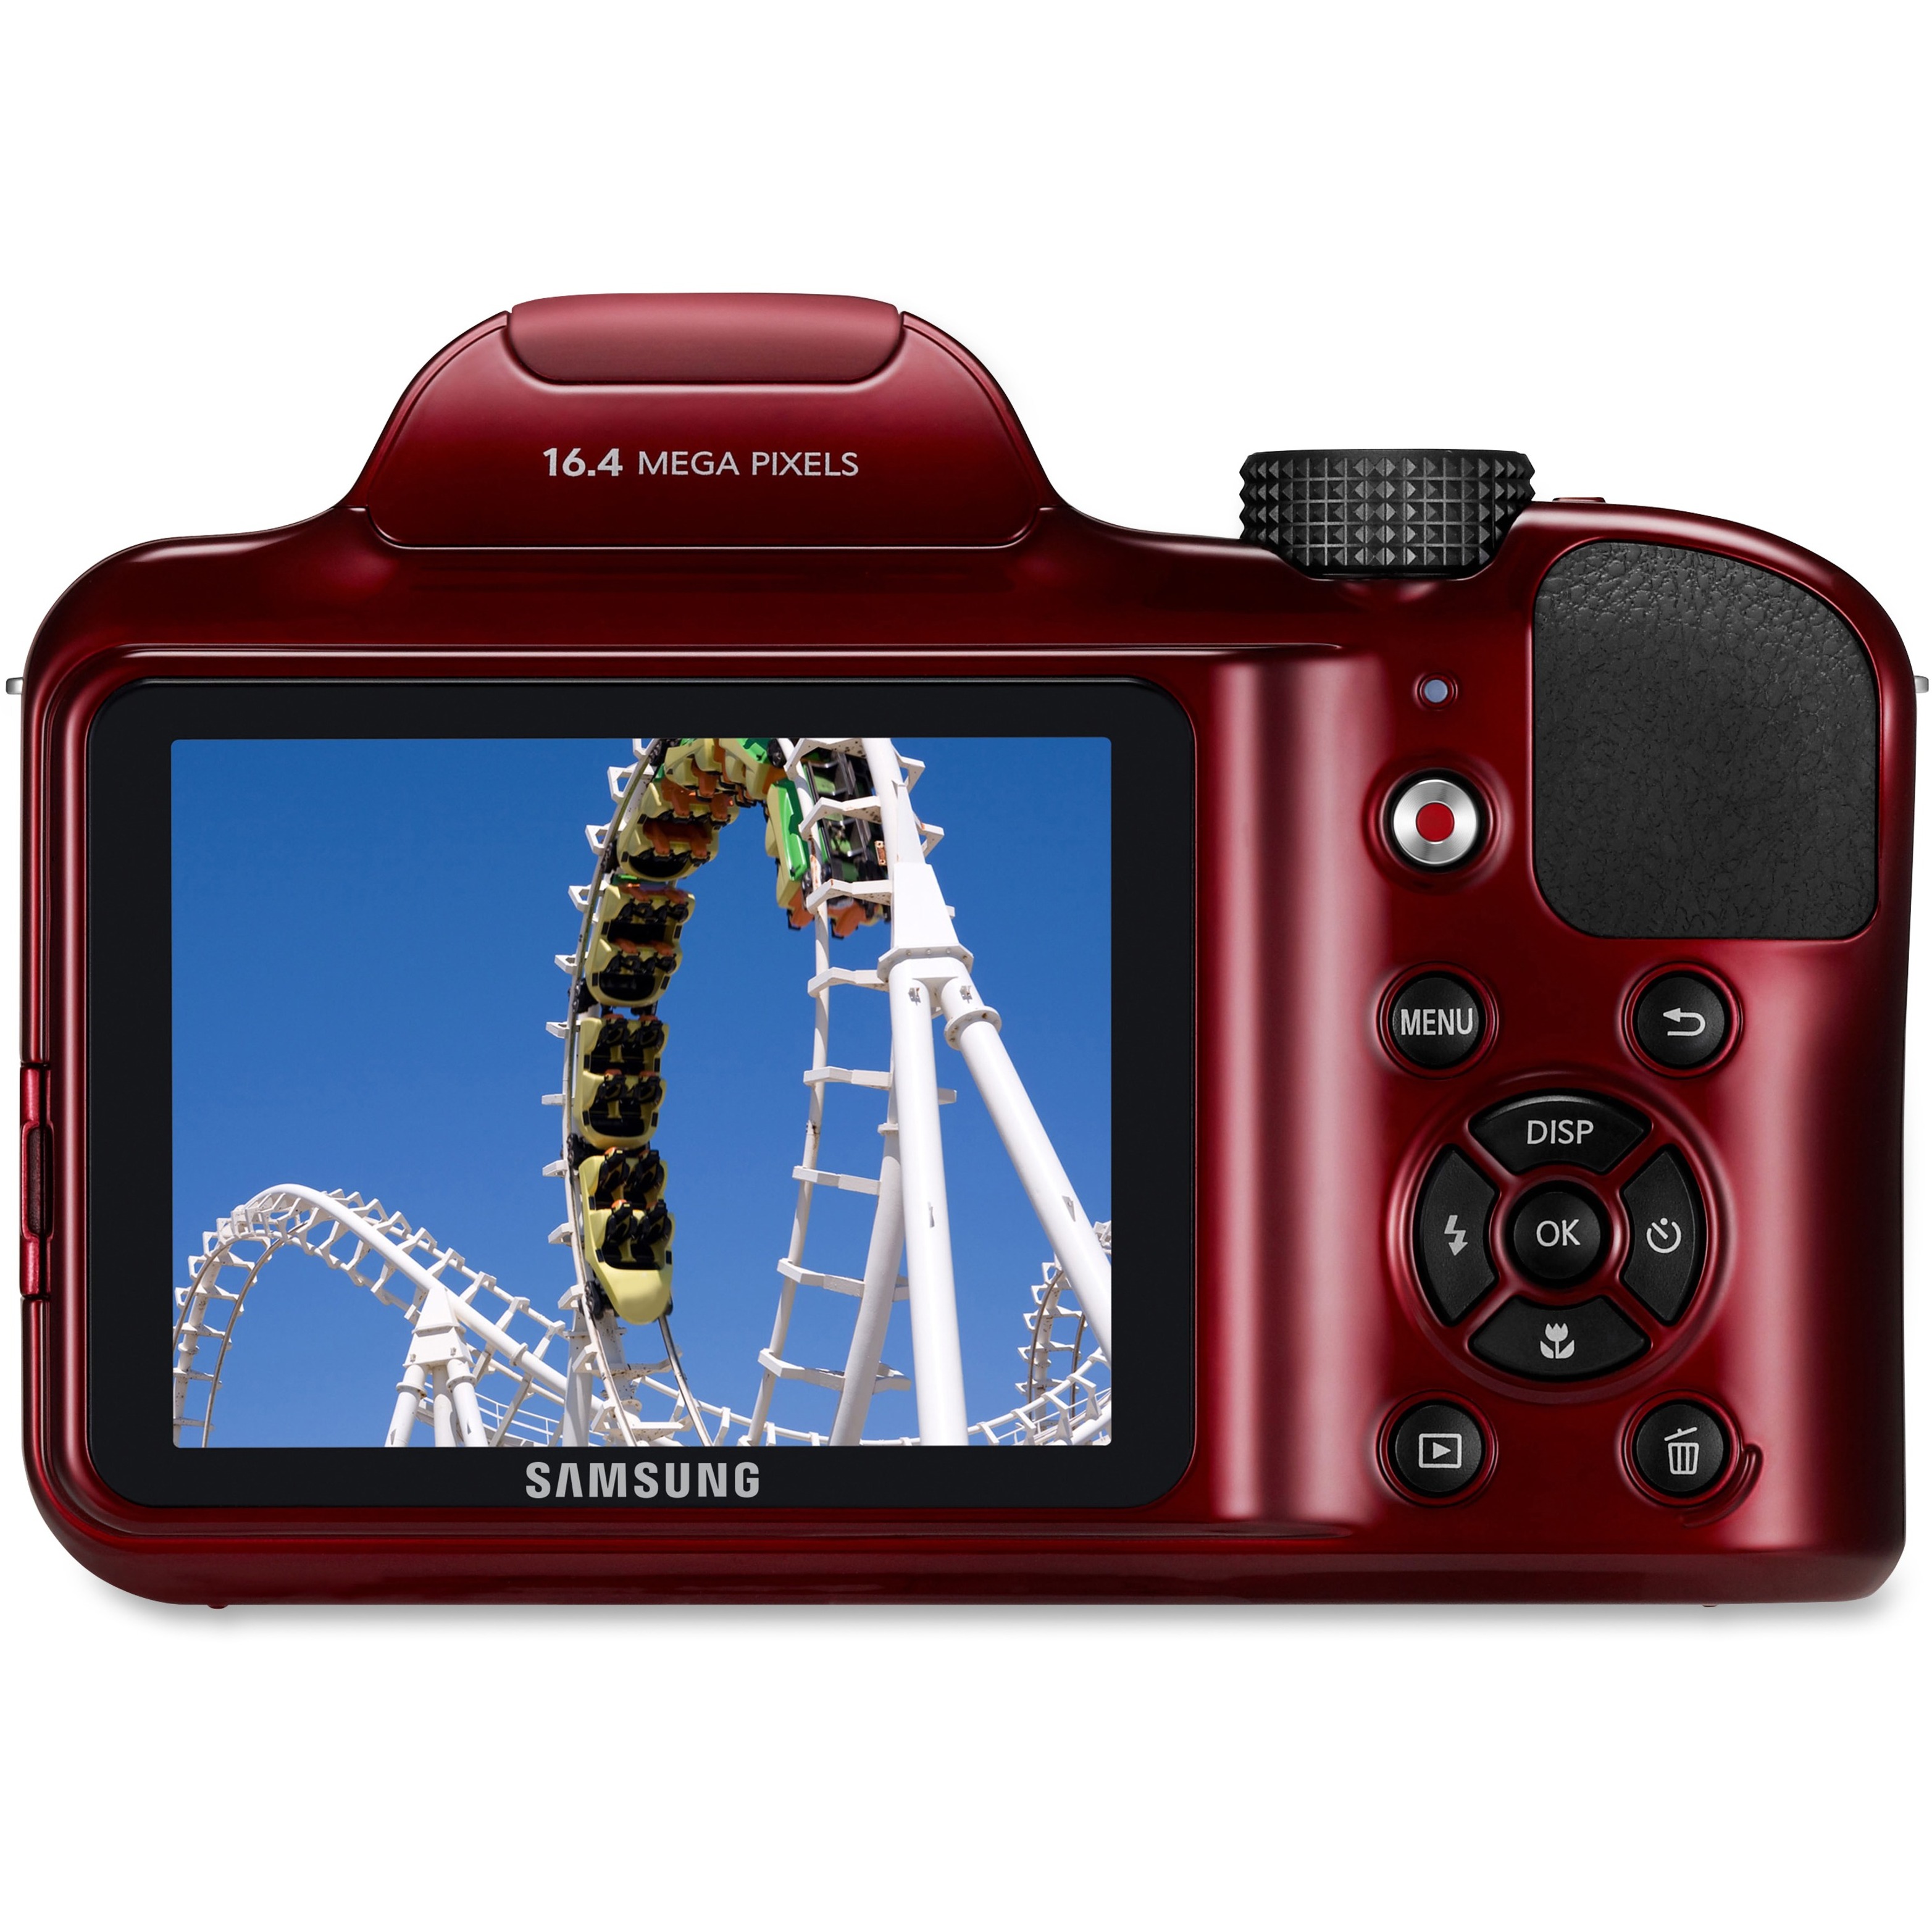 Samsung WB1100F 16.2 Megapixel Compact Camera, Red - image 2 of 5